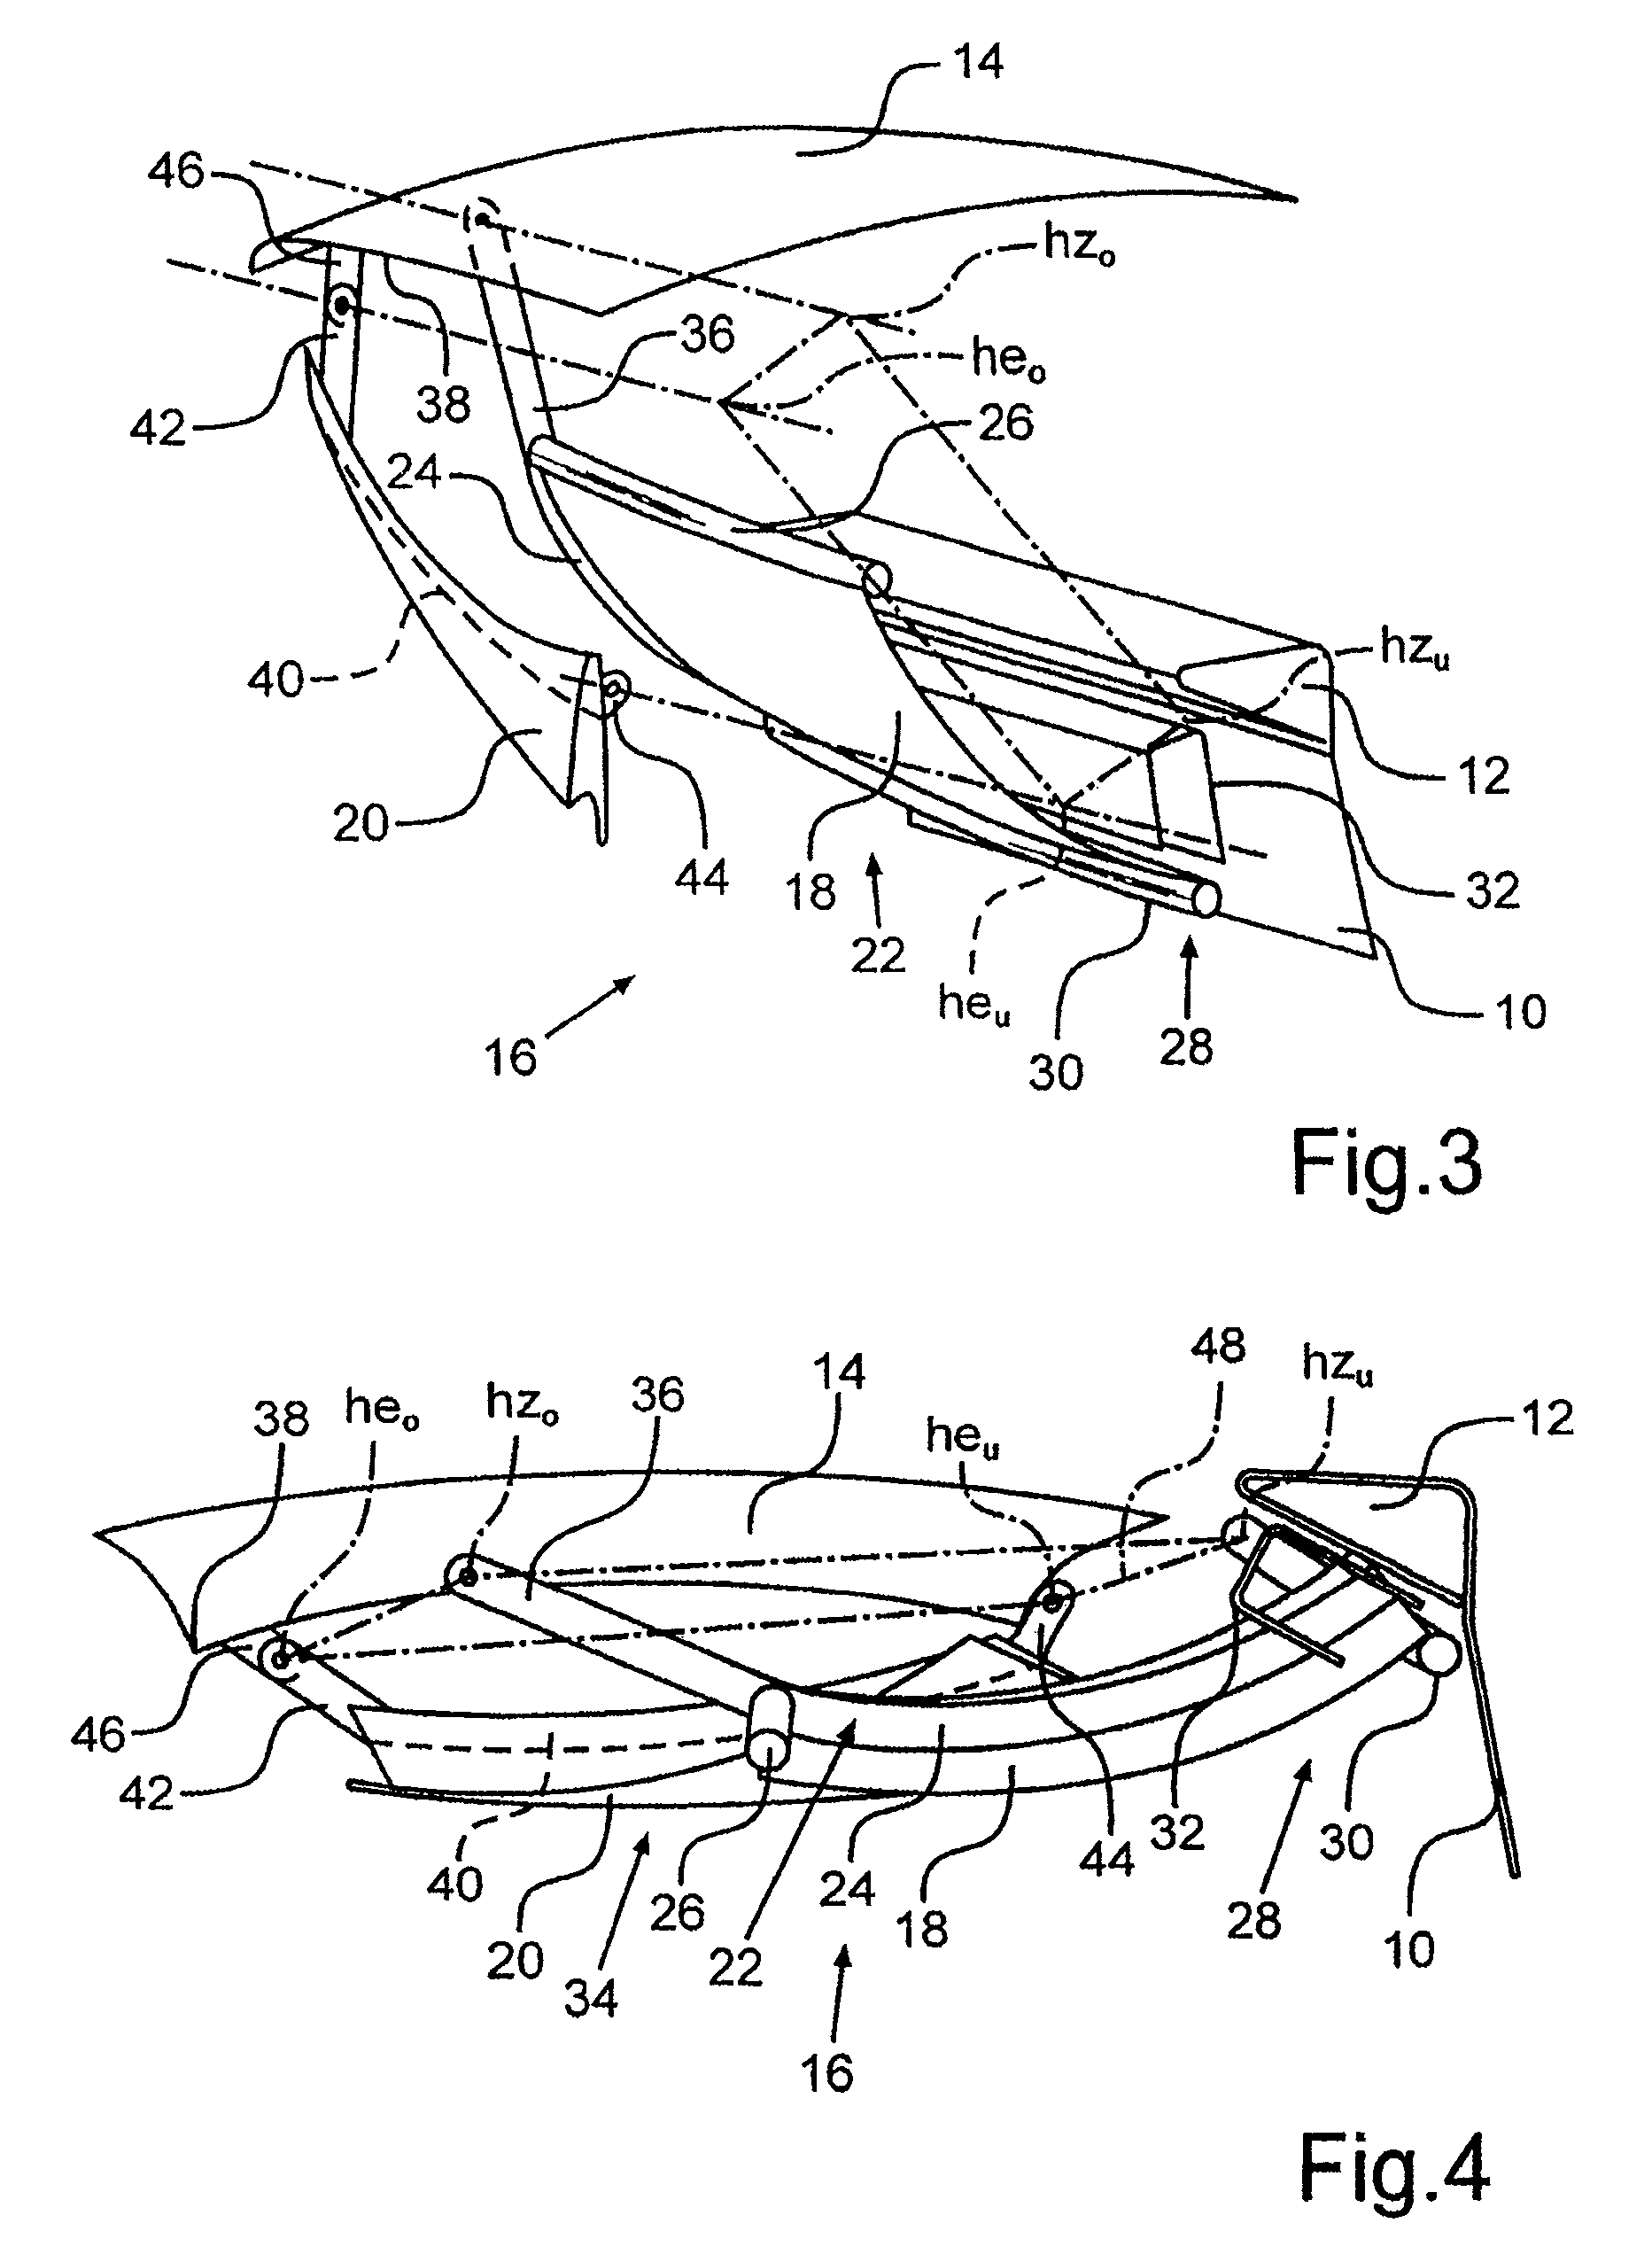 Hardtop folding roof for an open motor vehicle